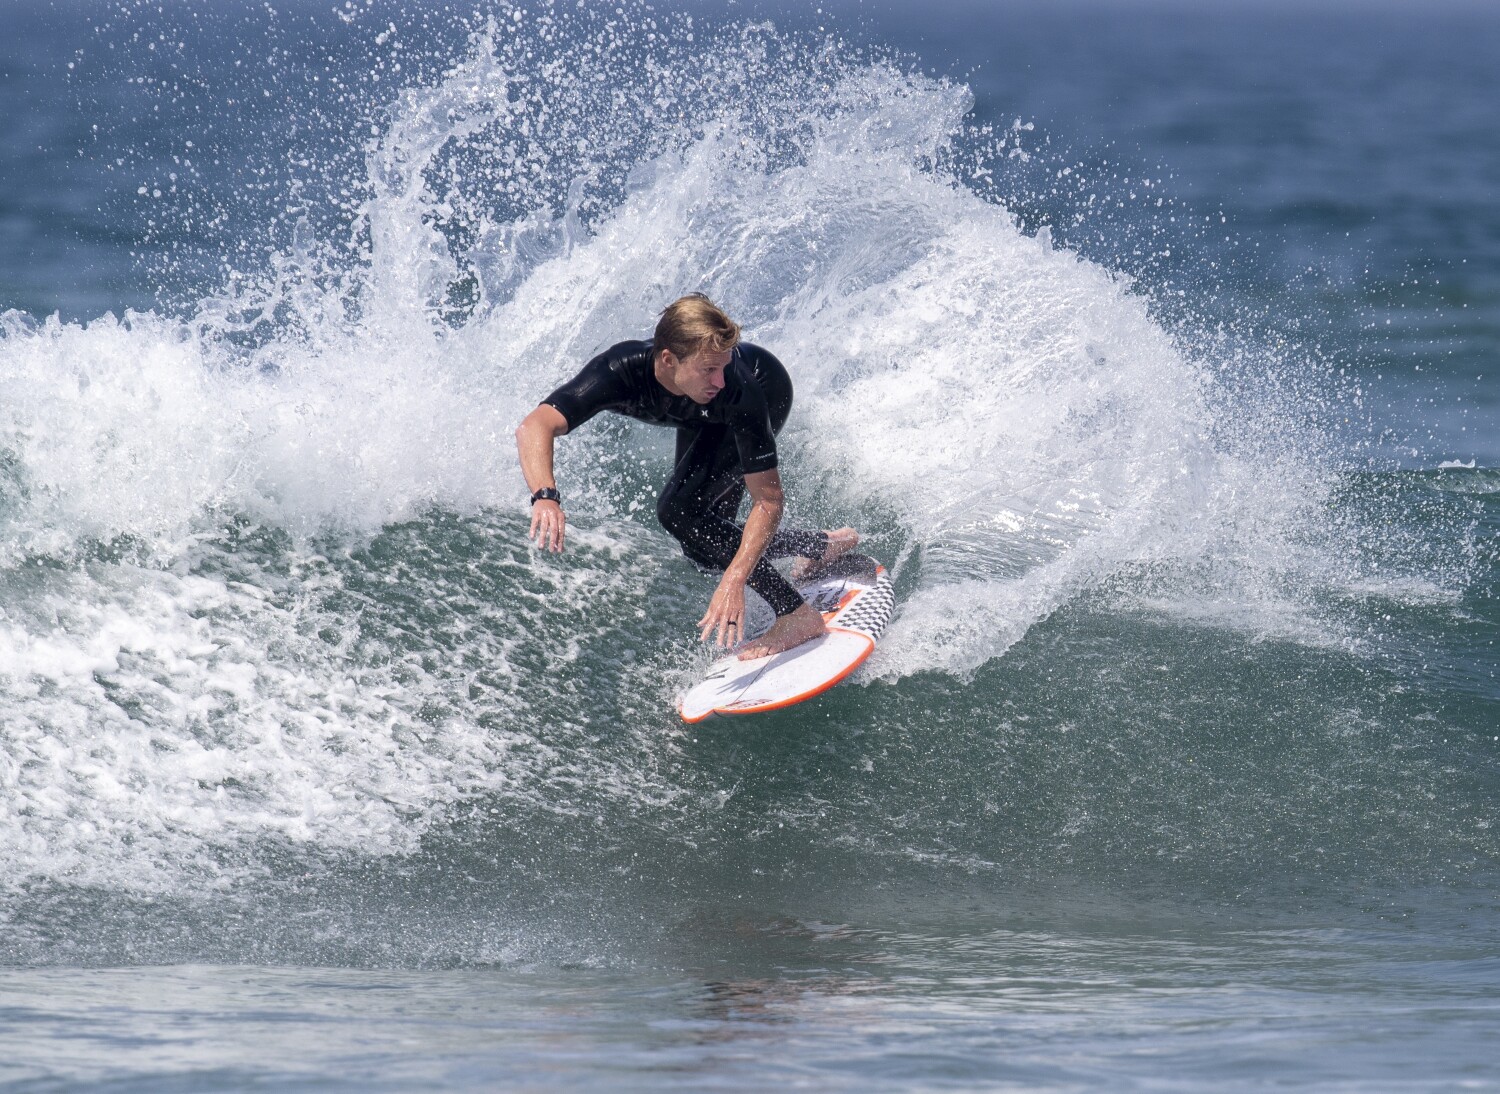 California surfer Kolohe Andino gets ready to head to Tokyo for the Summer Games